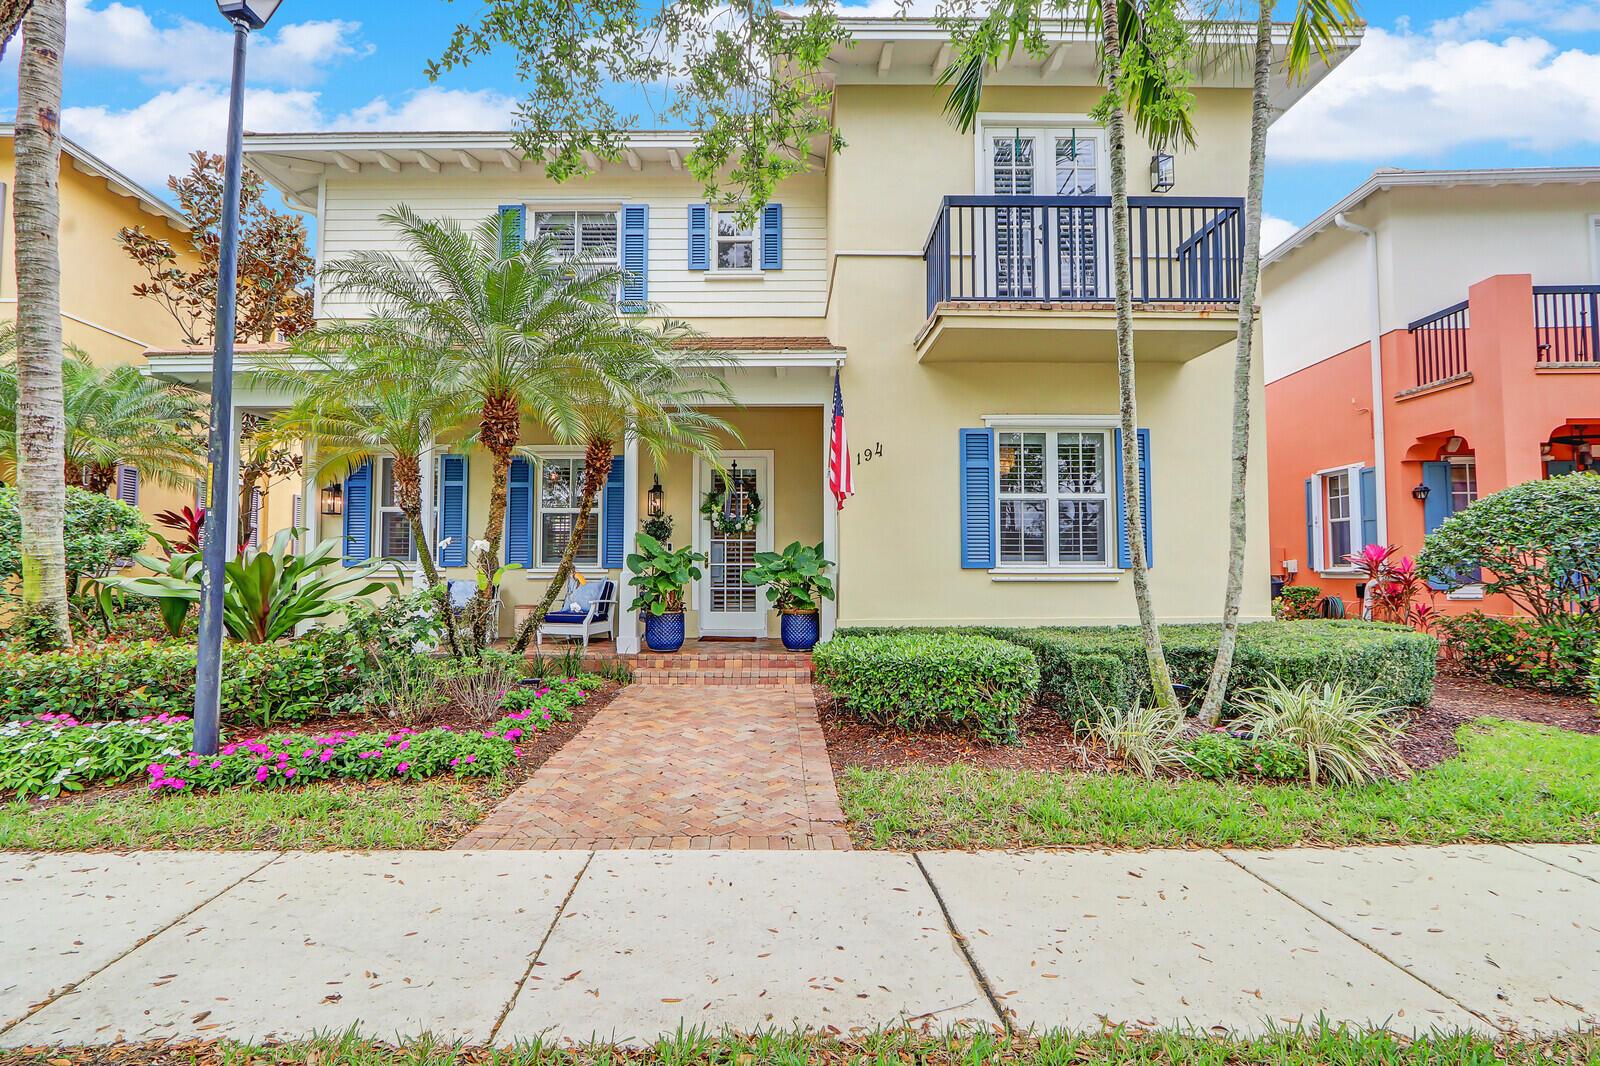 This 2-story exquisite CBS home in the desirable Jupiter area is a rare find w/Income producing 1/1 rental apartment over garage.  Main house has 5 bdrms & 4.5 baths & features high ceilings, wood floors, crown molding, & high-end plumbing fixtures throughout w/wainscoting on first floor & staircase.  Kitchen showcases marble countertops, stainless appliances & oversize GE Cafe refrigerator.  Beverage area has icemaker and mini-fridge. Designer wallpaper adds warmth and texture in the large dining room.  3 car garage features epoxy floor.  Pavers provide extra parking off garage.  Relax in the manicured back yard w/gas burning fireplace & turf for easy maintenance.  Landscape lighting makes this private oasis available day and night.  3 newer a/c units. Impact windows & doors + shutters.